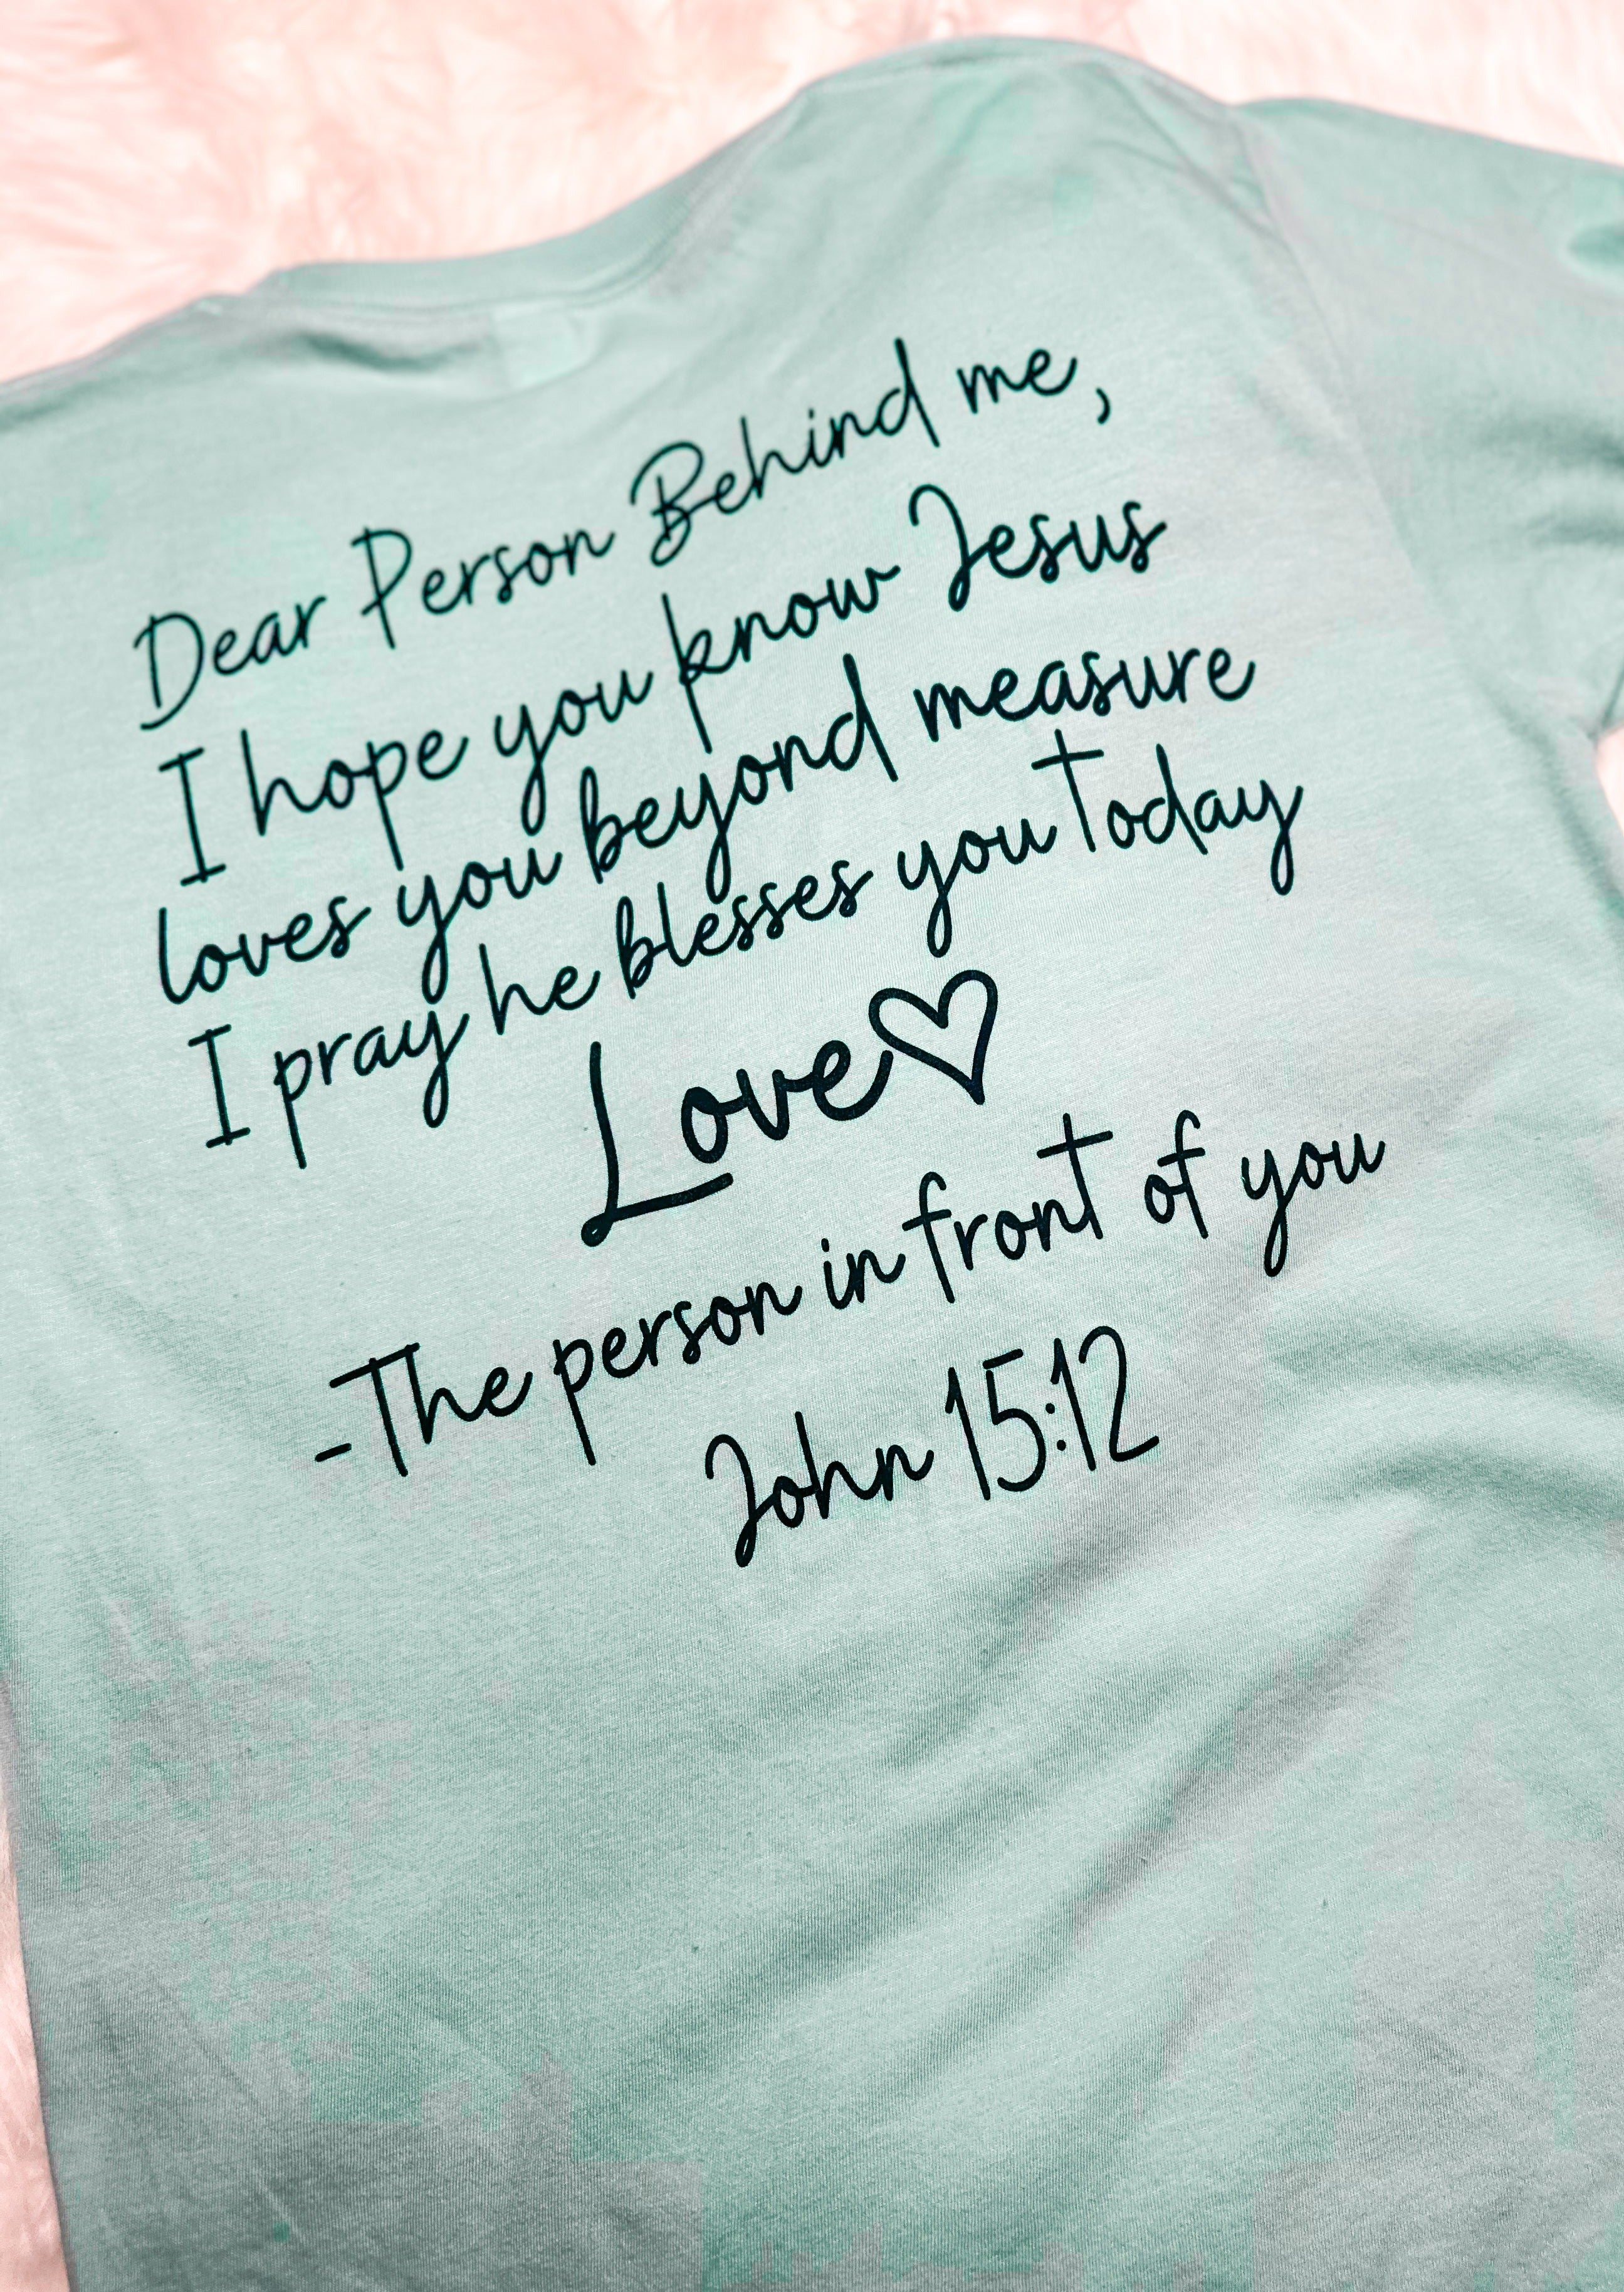 SKy blue tultex tee shirt - love like jesus on the front left side with  John 15:12 - on the back dear person behind me, I hope you know jesus loves you beyond measure I pray he blesses you today love (heart) - the person in front of you  John 15:12